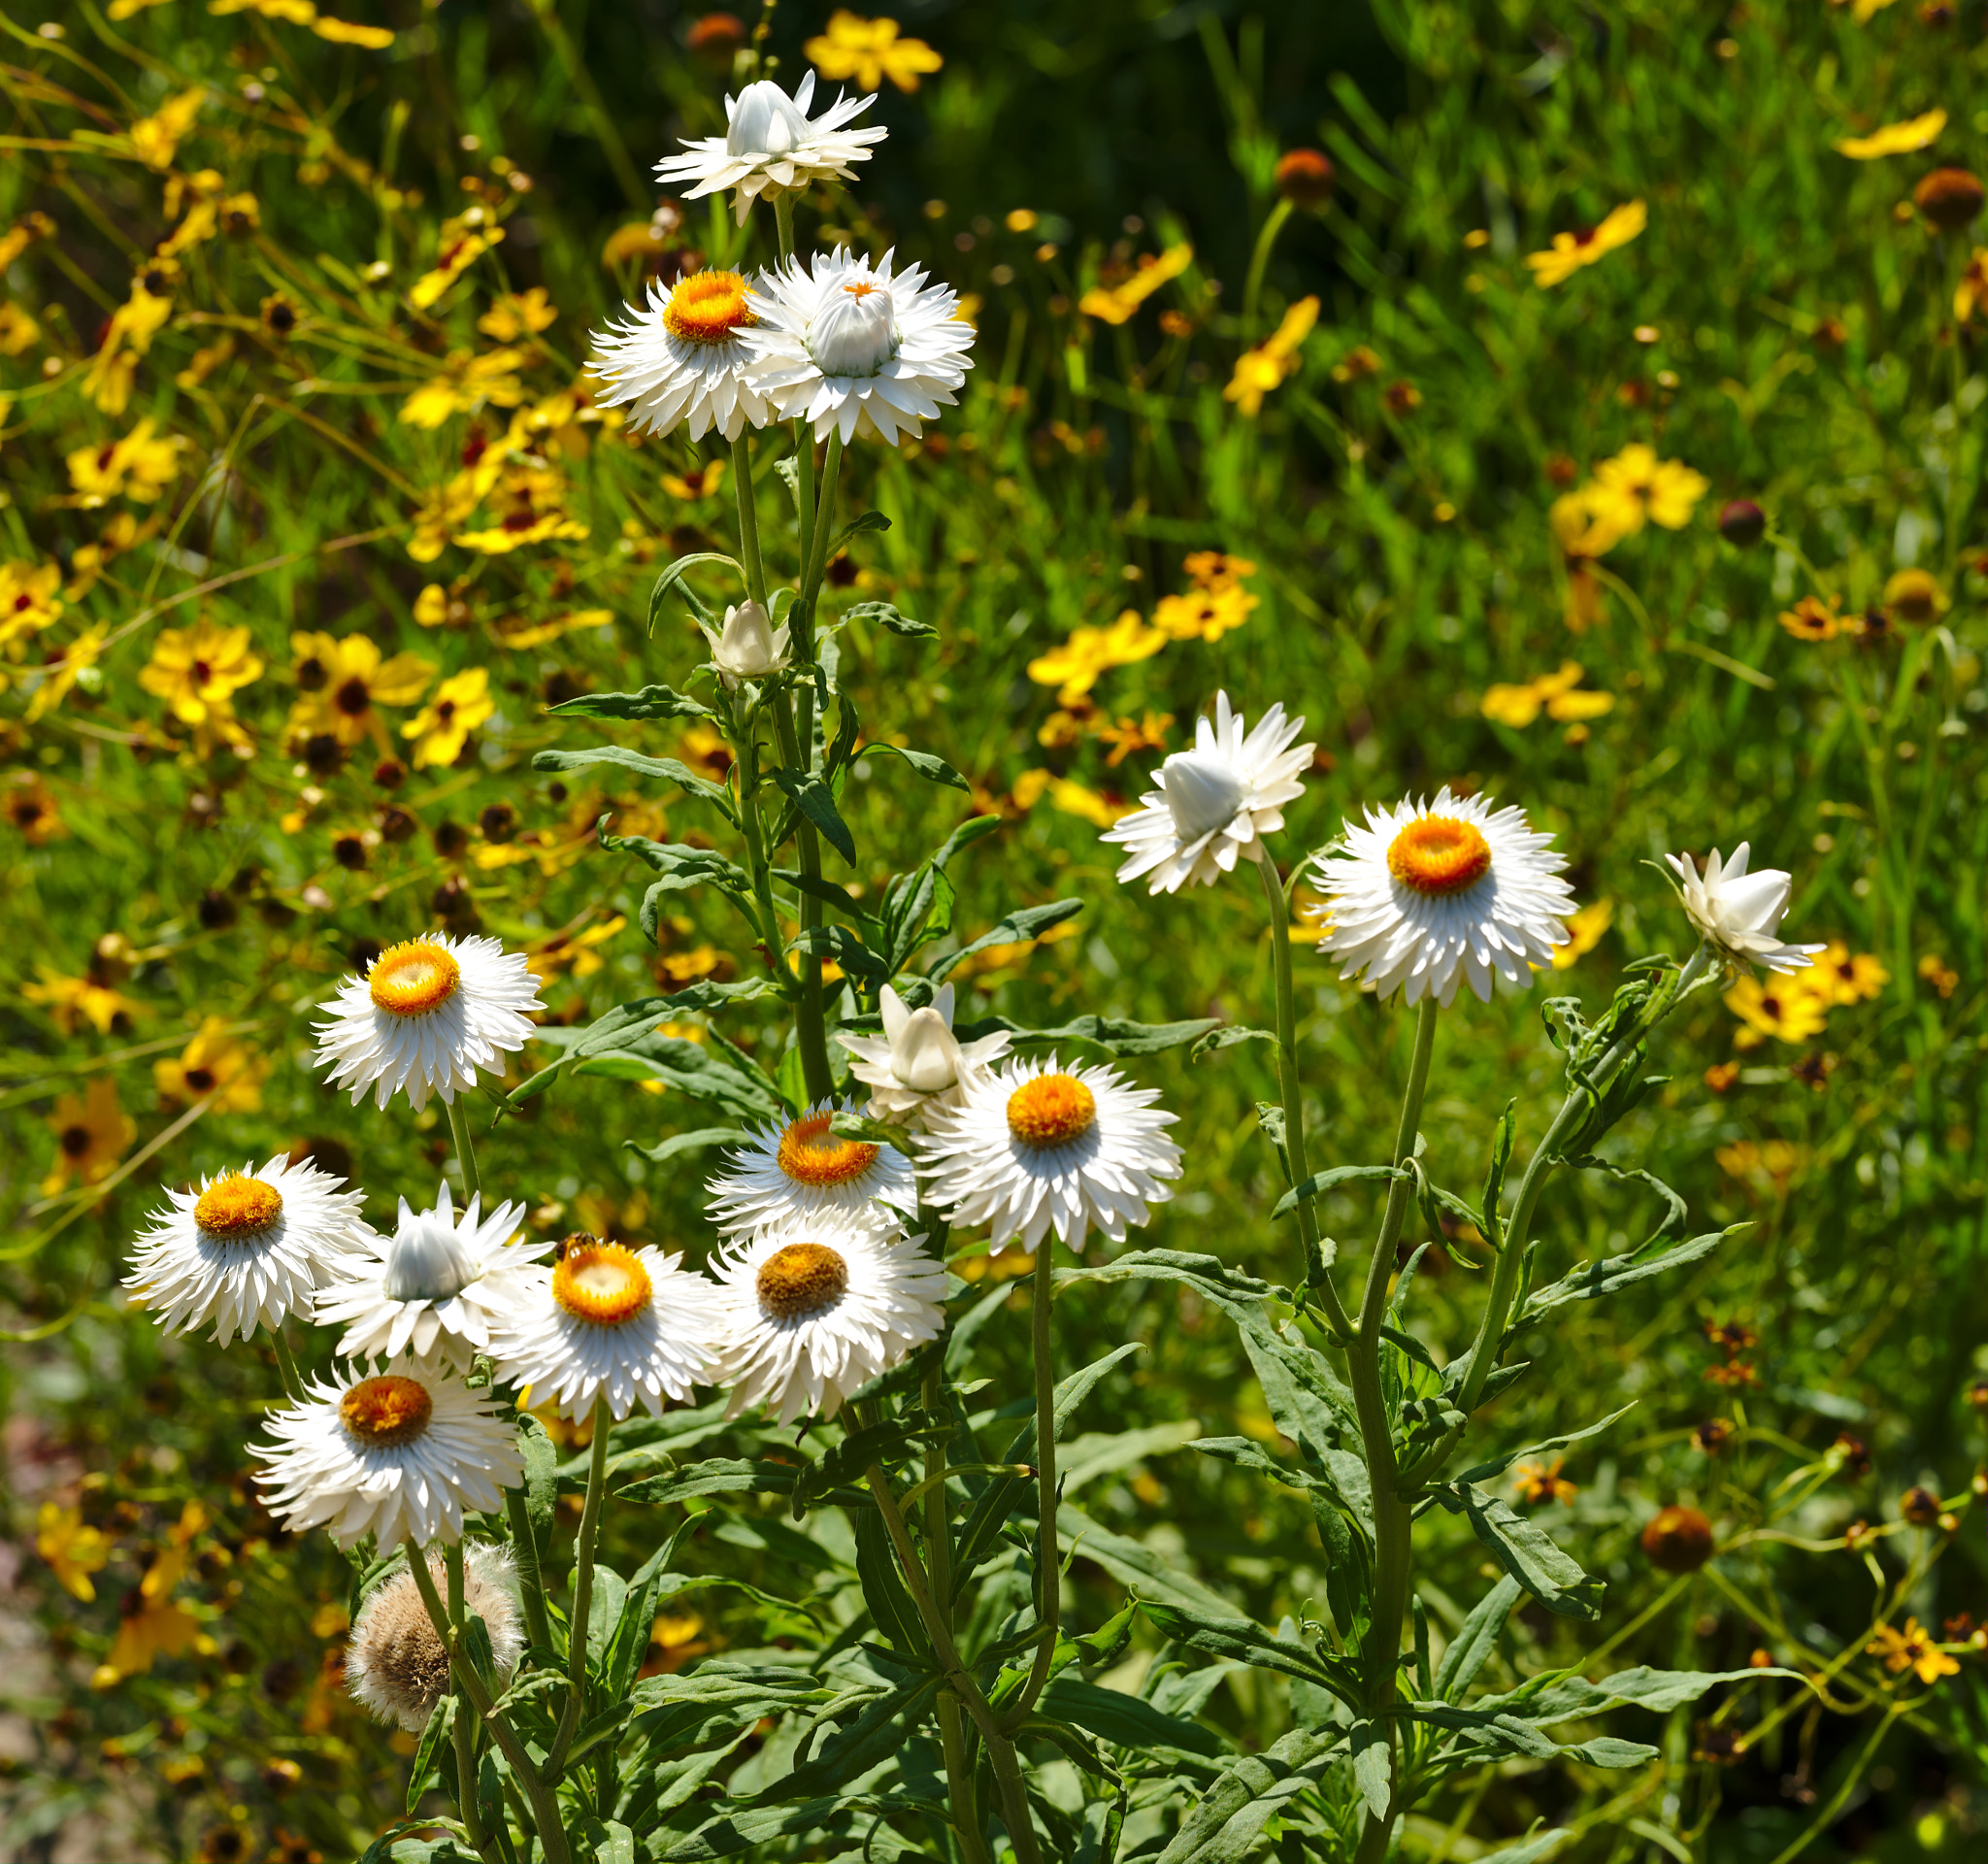 ZEISS Otus 85mm F1.4 sample photo. Daisies in front of yellow flowers photography